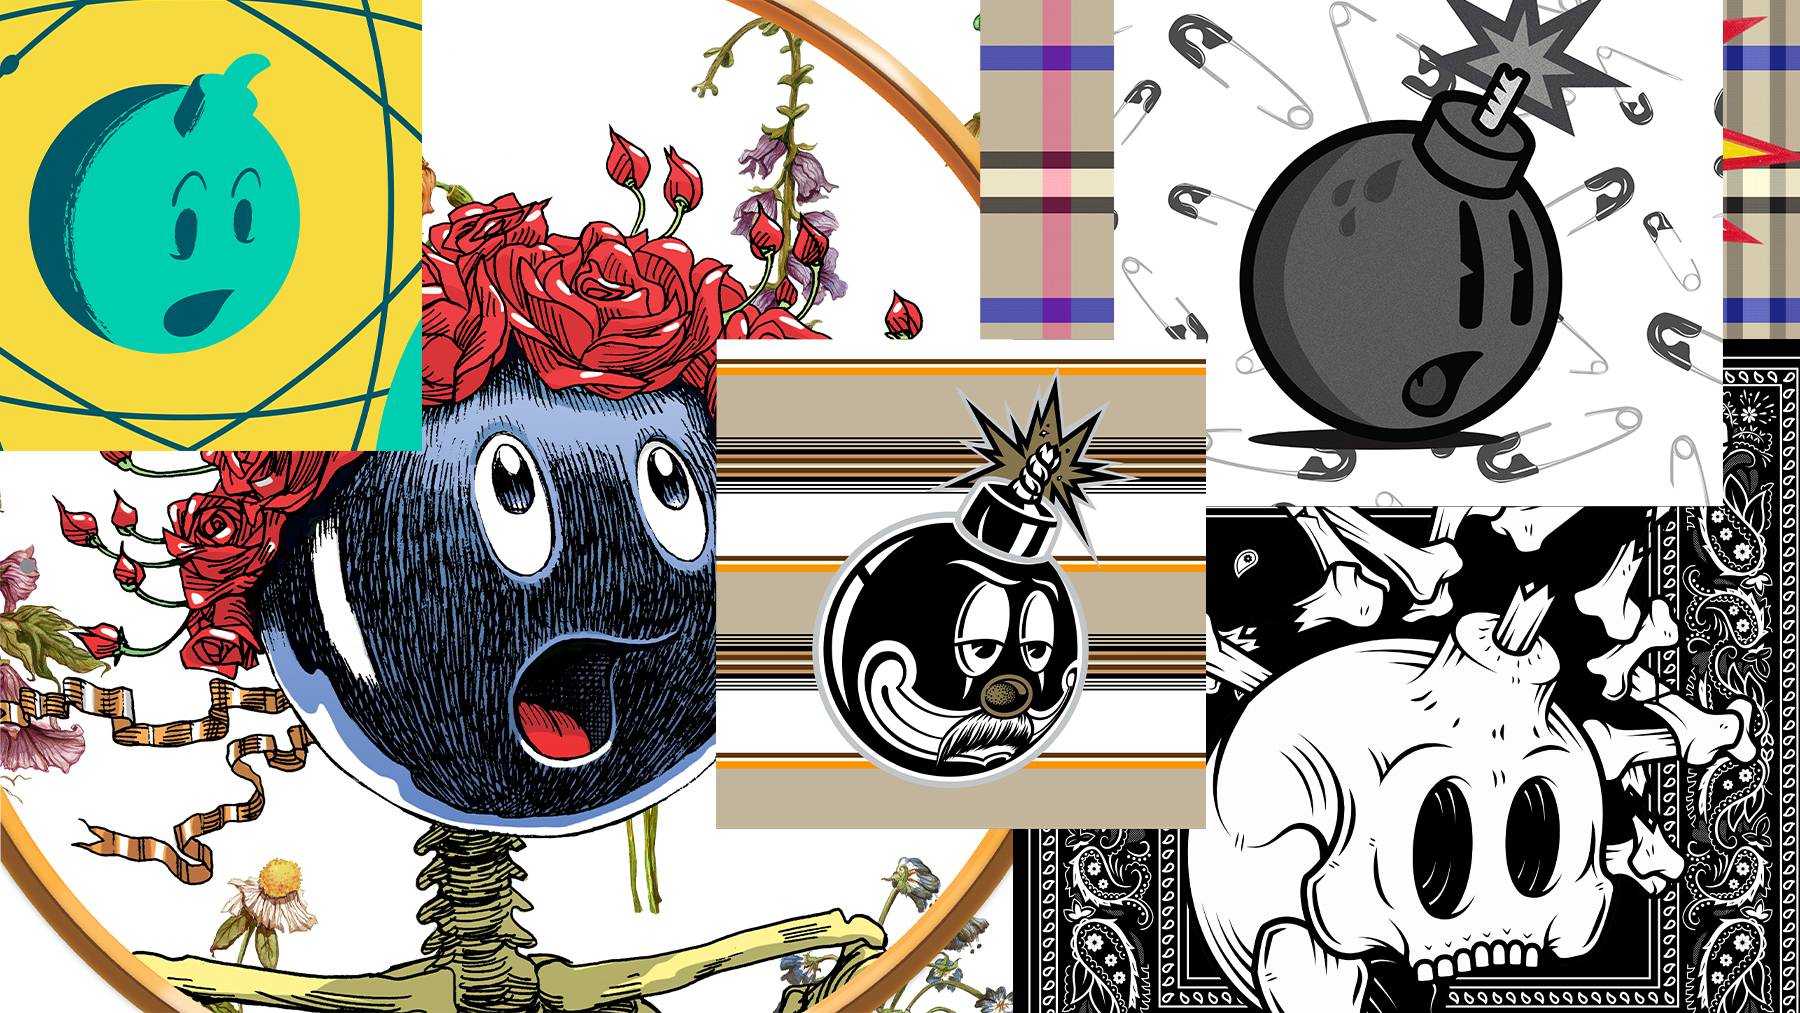 A collage shows an array of cartoon bombs.